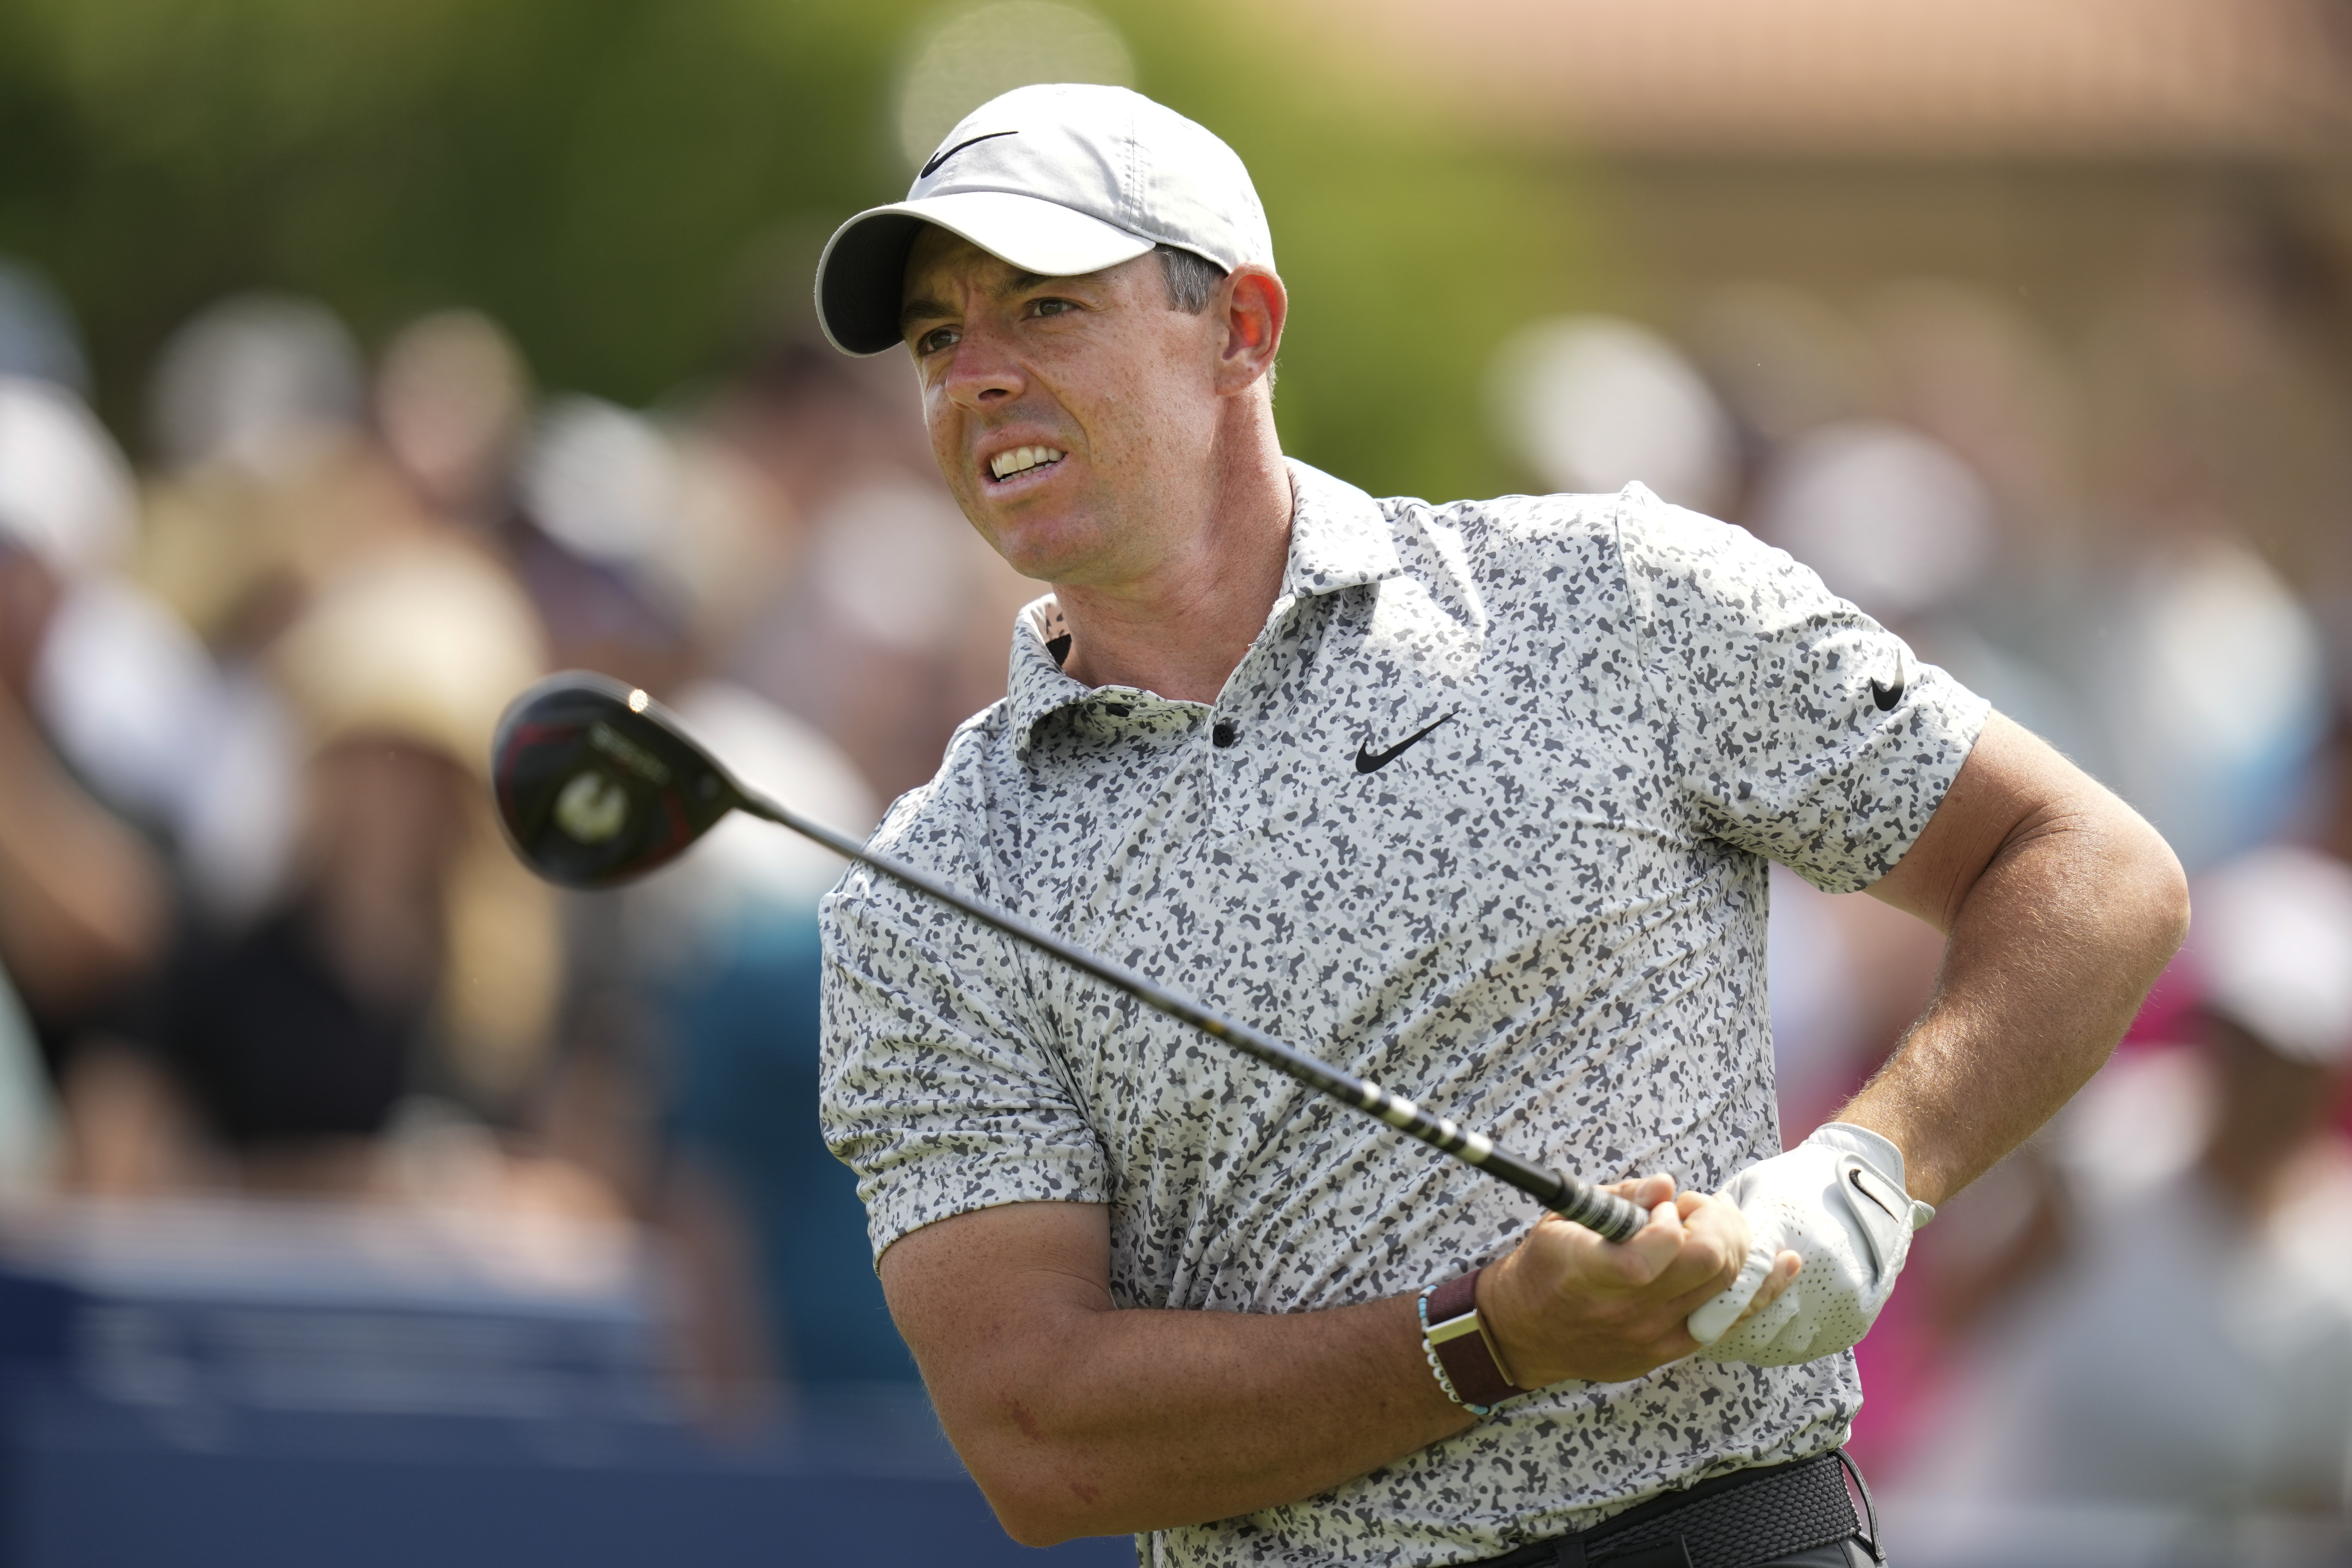 Players Championship 2023 R2 - Rory McIlroy continued to struggle during his second round at Sawgrass